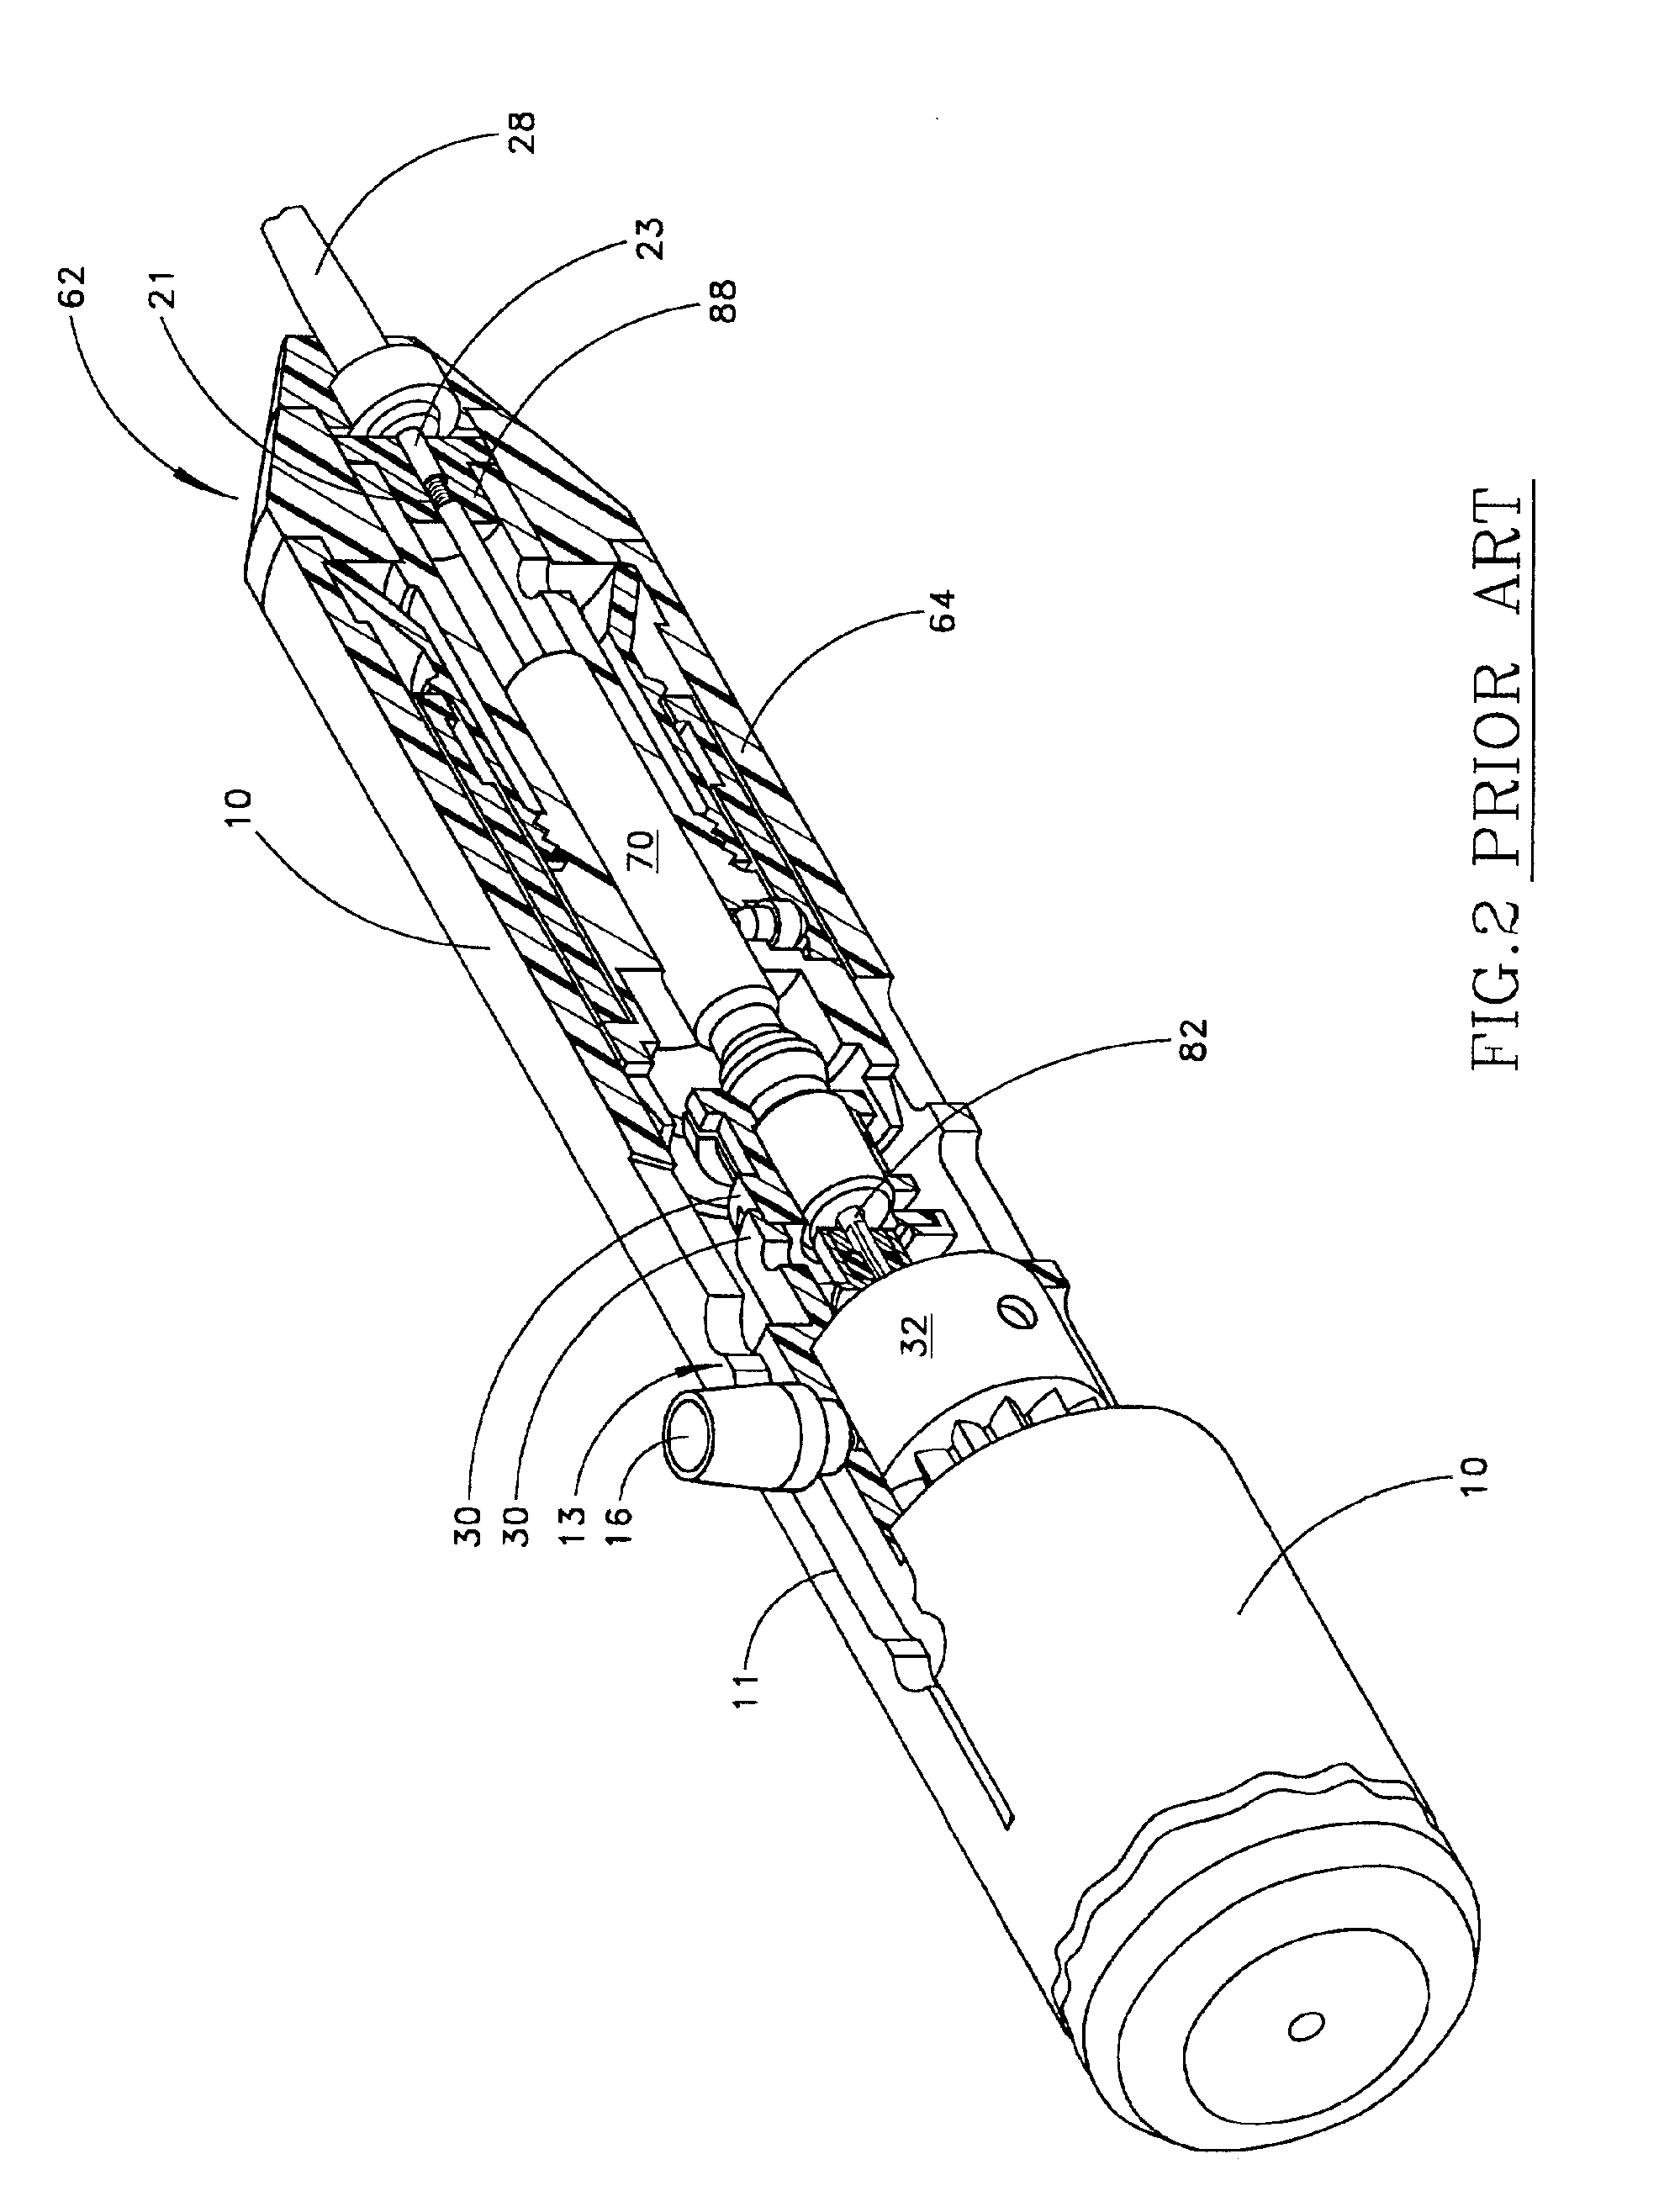 Self-indexing coupling for rotational angioplasty device